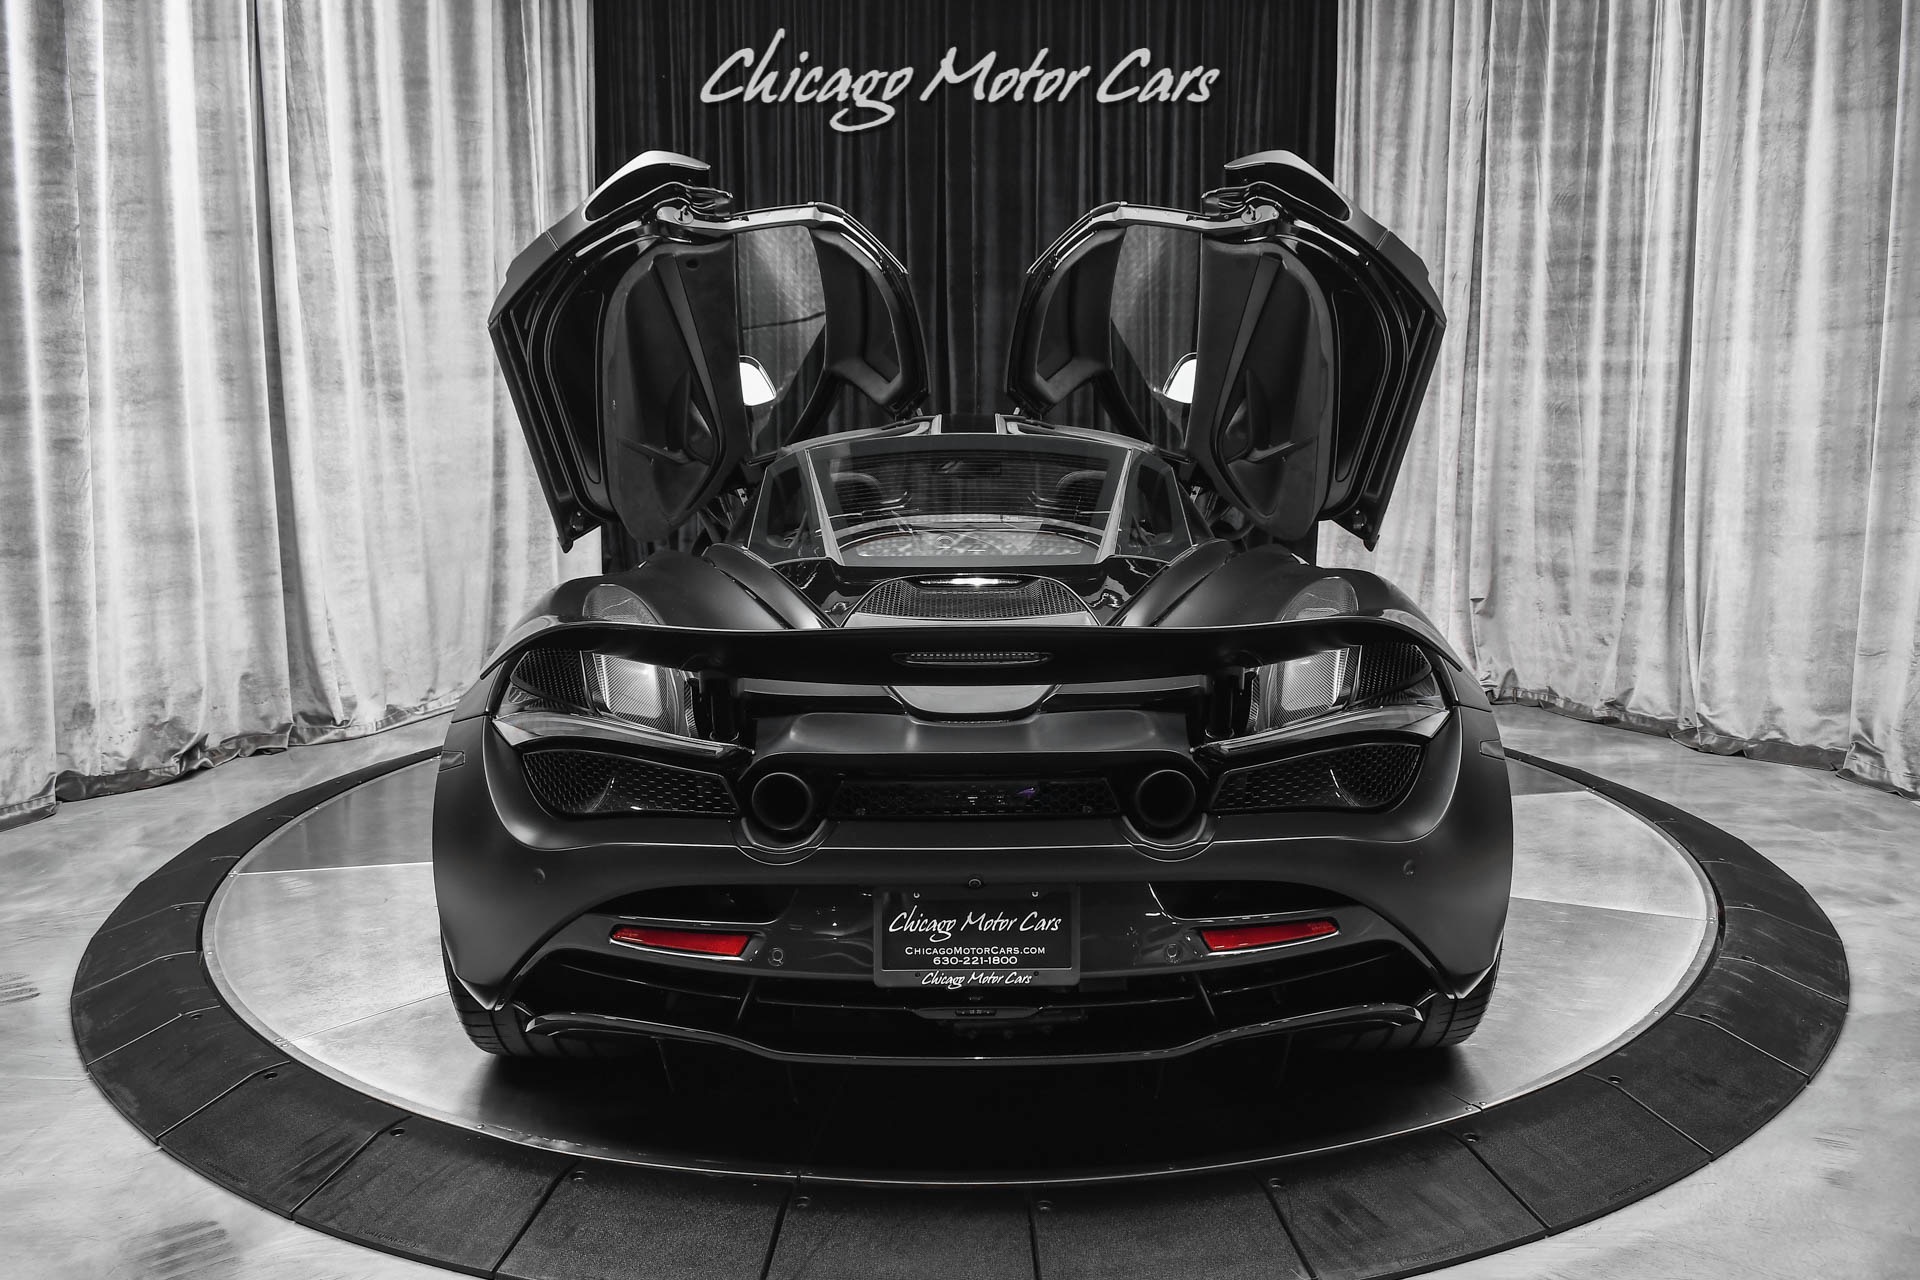 Used-2018-McLaren-720S-Performance-Coupe-Satin-Black-PPF-Front-Lift-Akrapovic-Exhaust